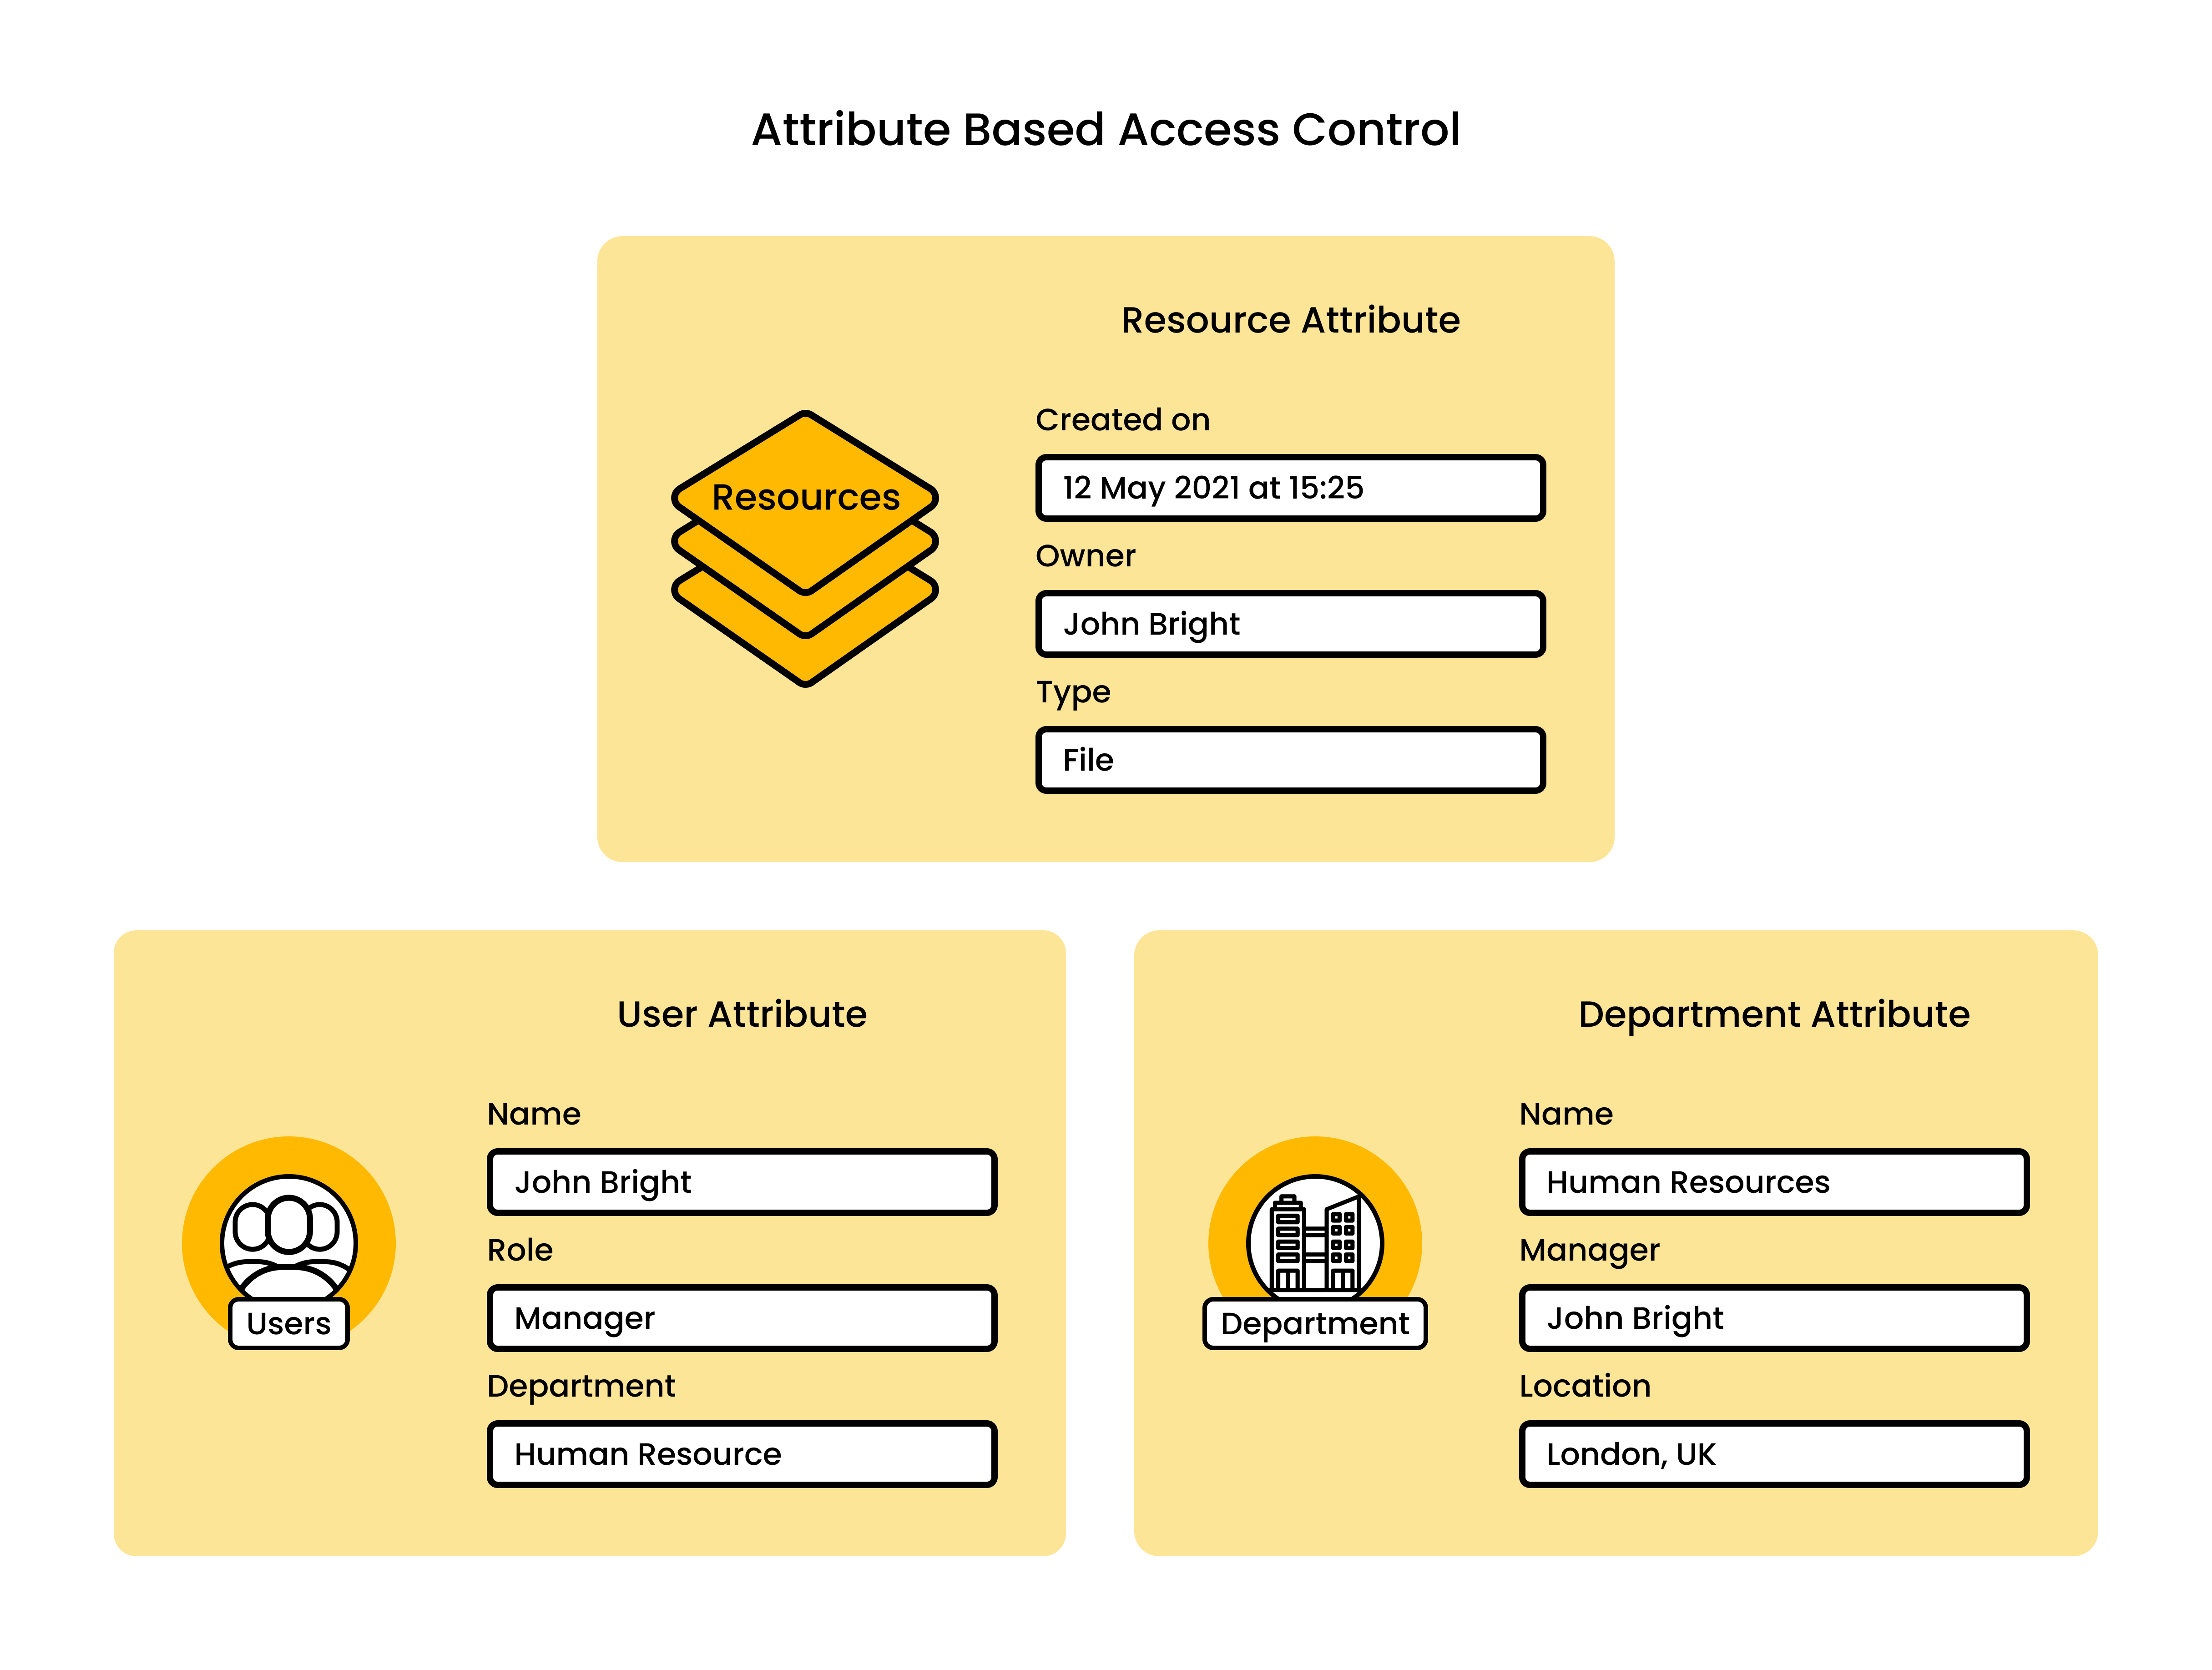 Attribute-based access control